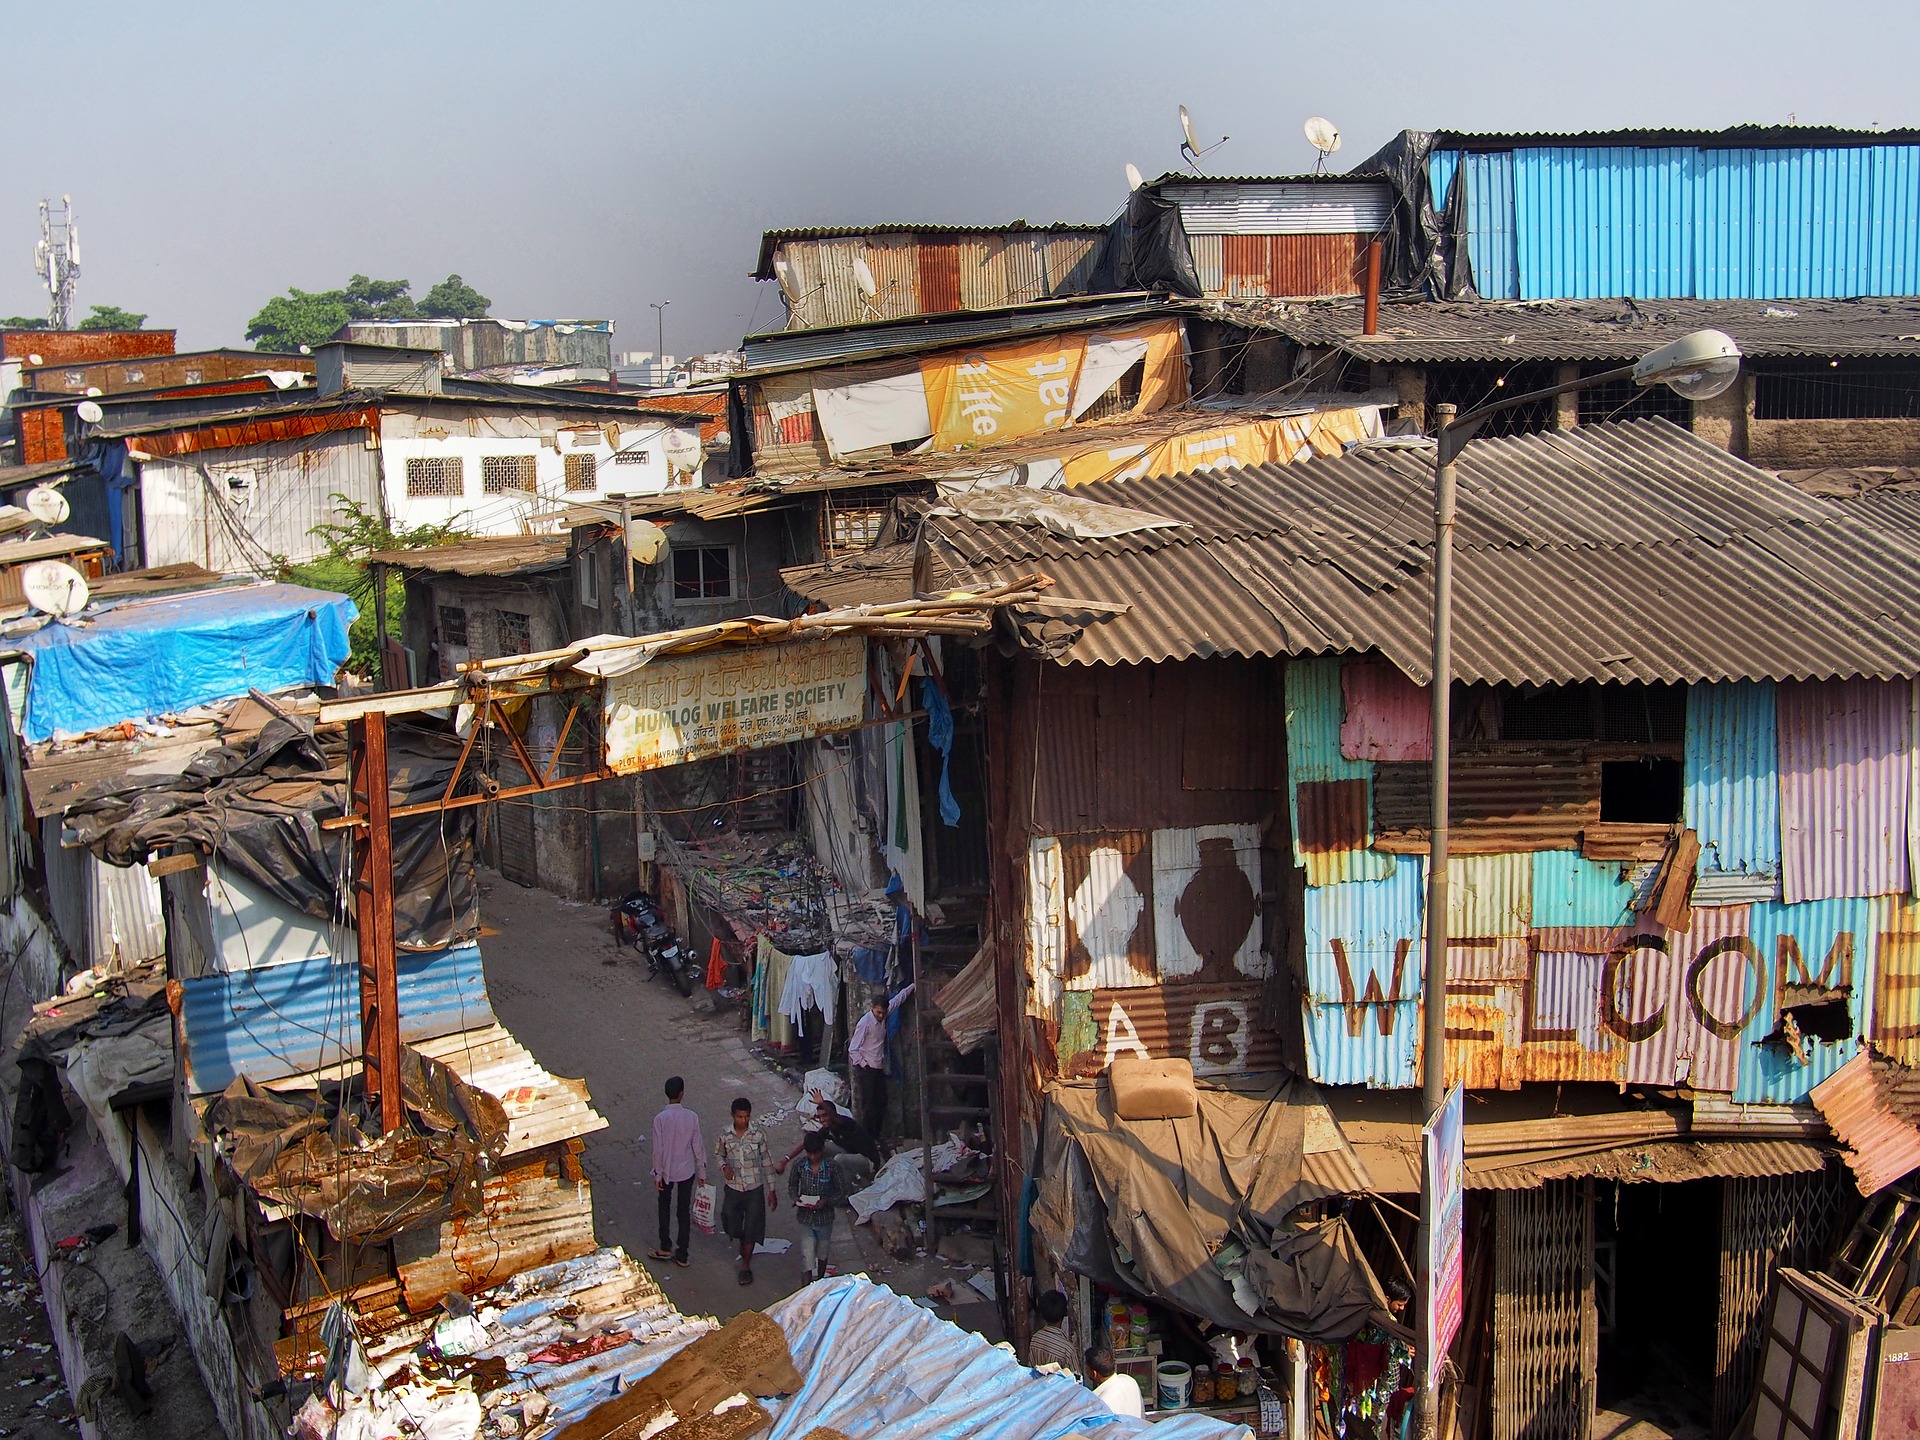 dharavi shanty town case study